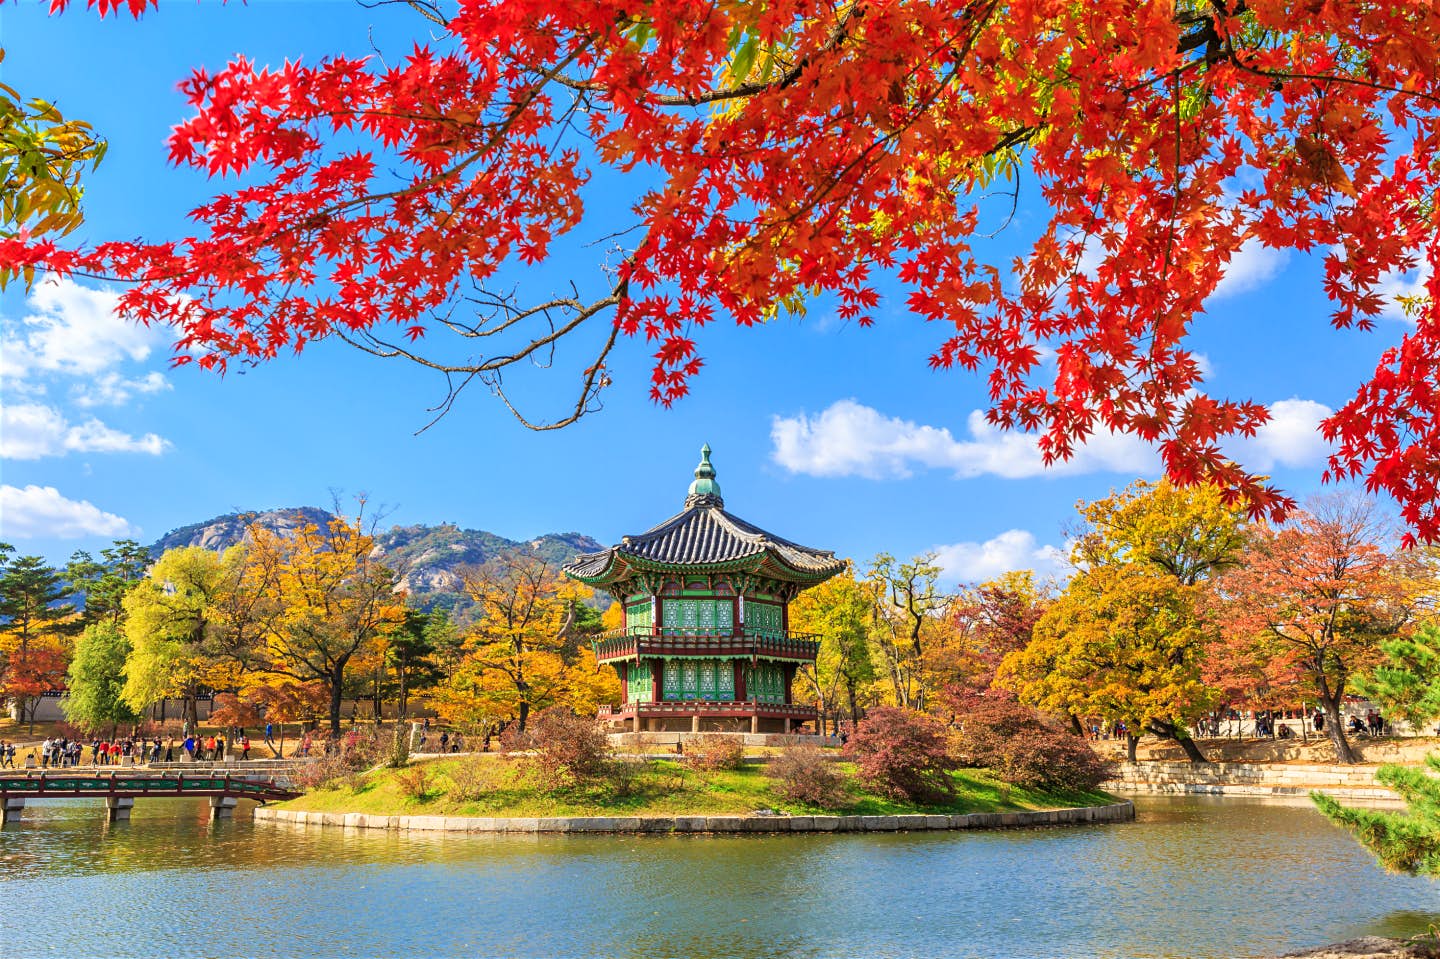 A tourist attraction temple in South Korea looking beautiful in autumn